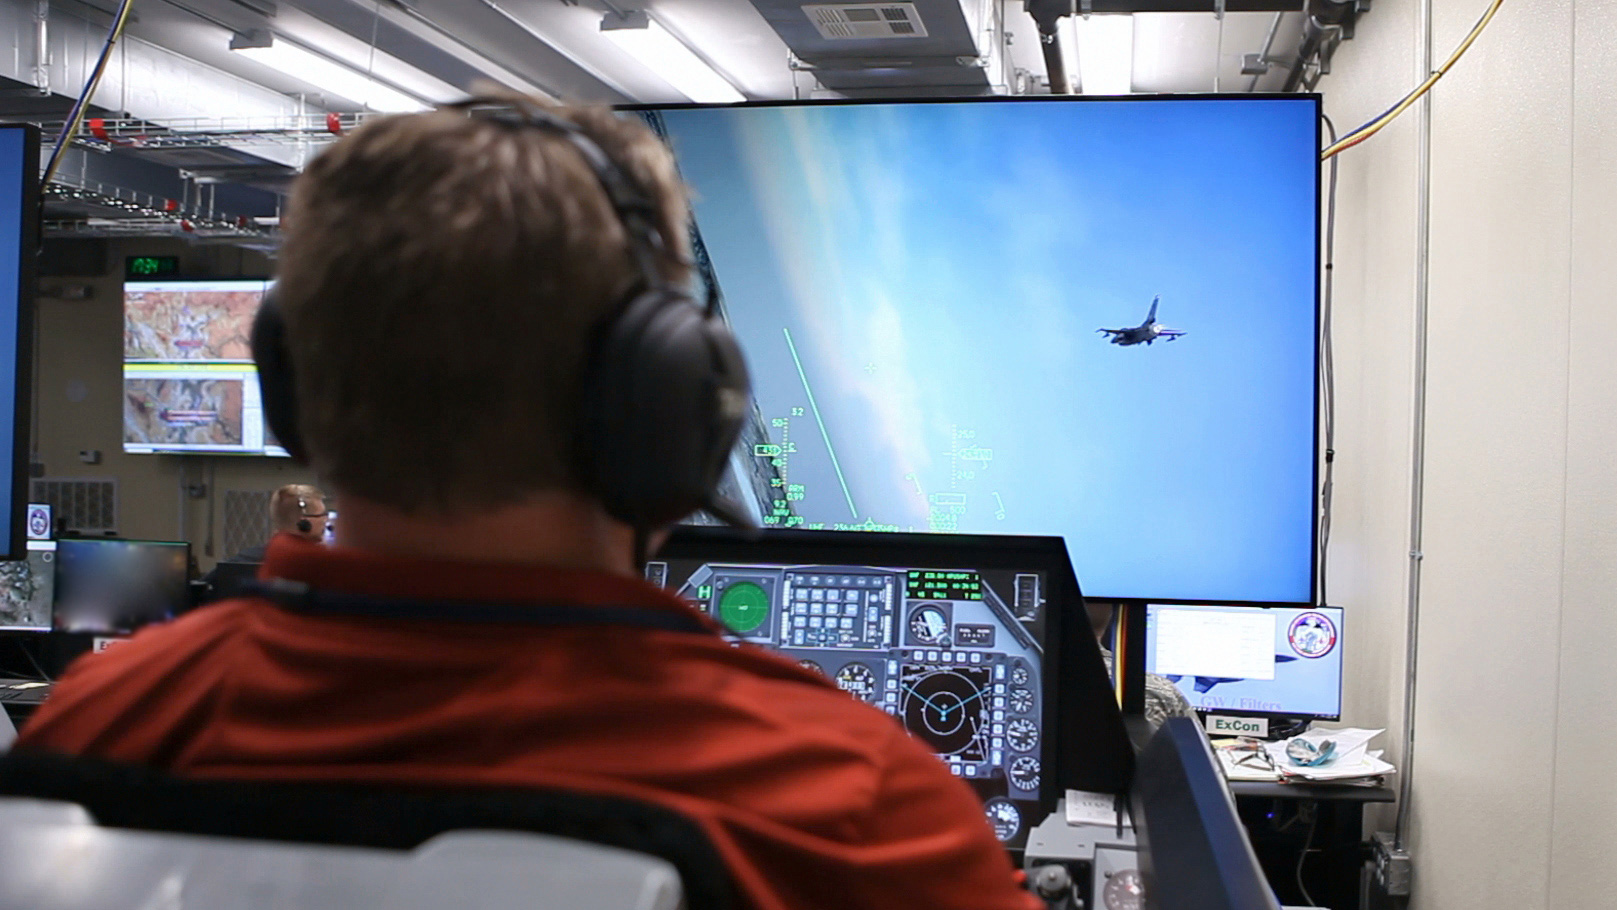 Donald Simones at AFRL’s 711th Human Performance Wing, flies the simulated F-16 in a Deployable Tactical Trainer with the virtual scene rendered in VRSG during the SLATE demonstration at Nellis Air Force Base, September 2018. (U.S. Air Force photo.)